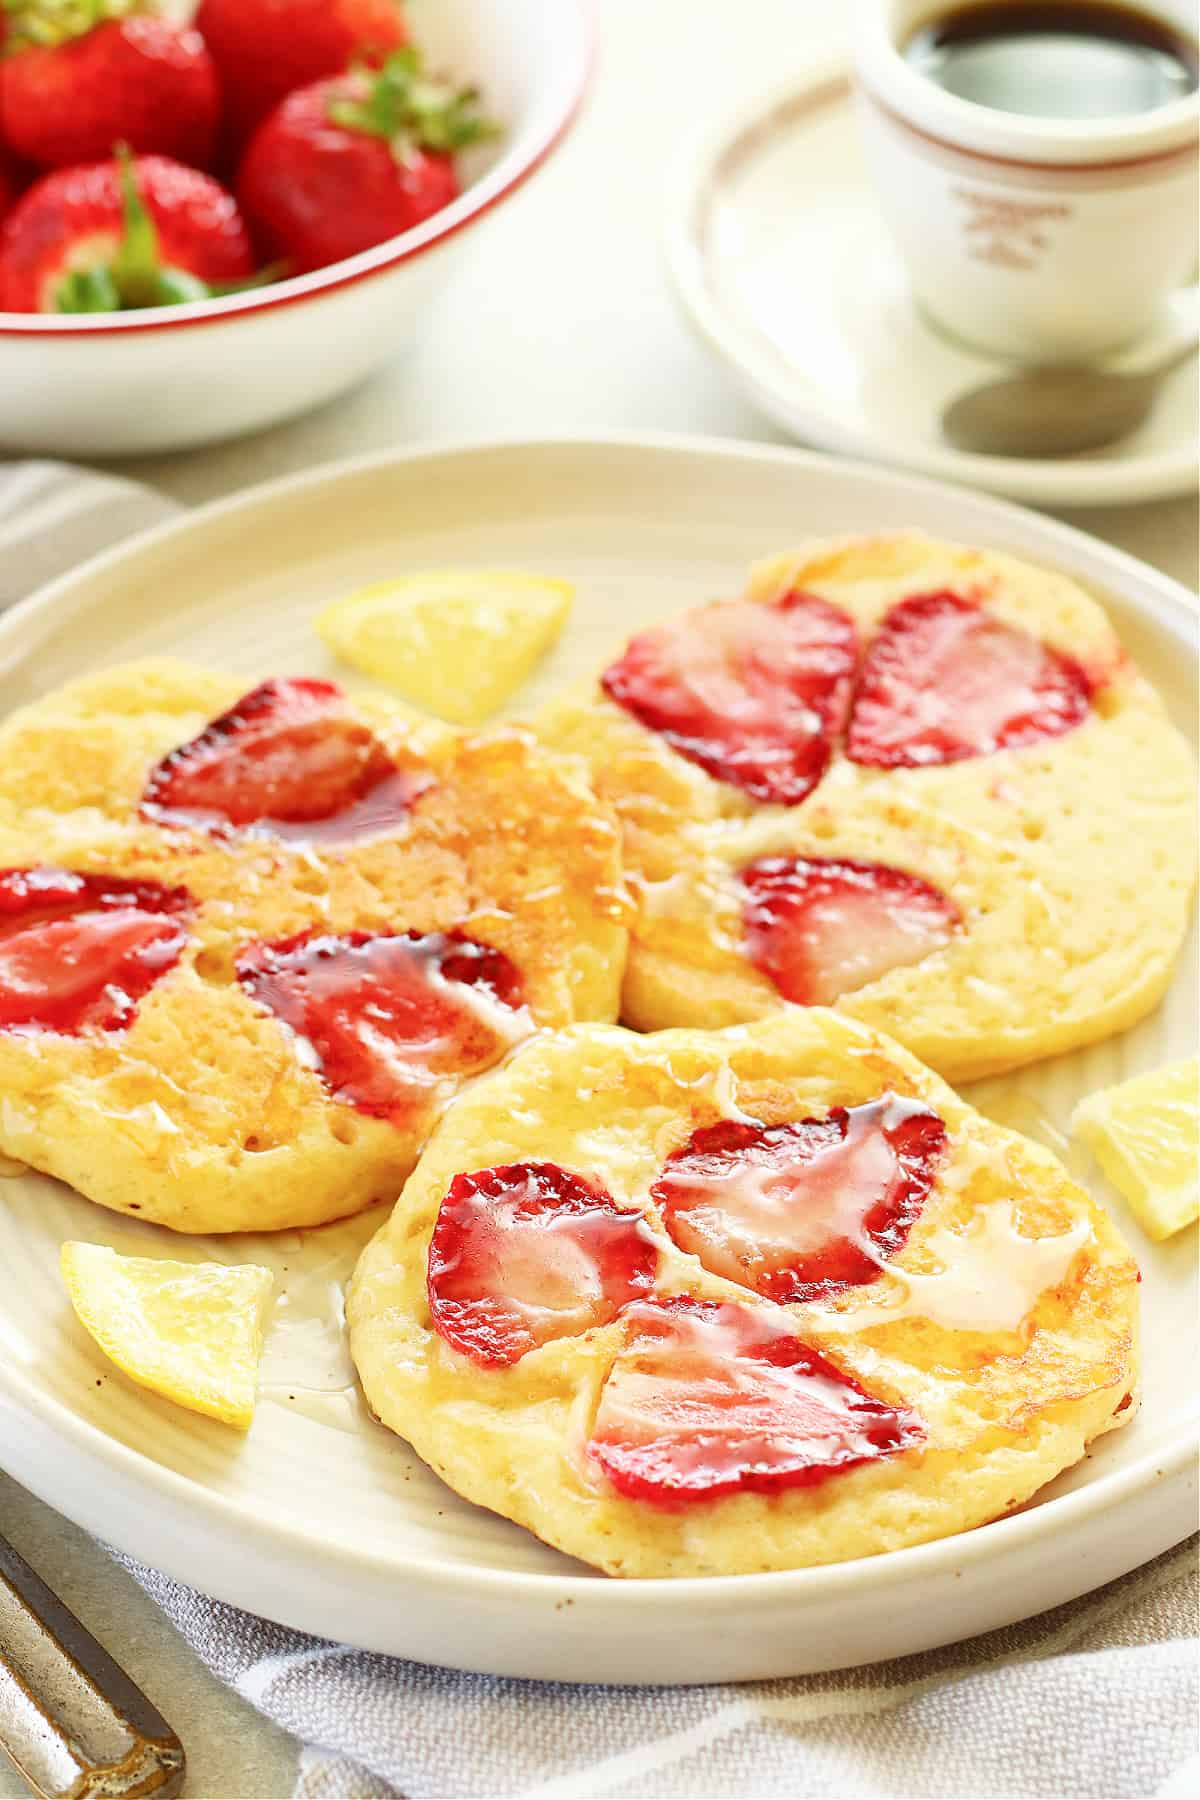 Three strawberry pancakes on a plate.